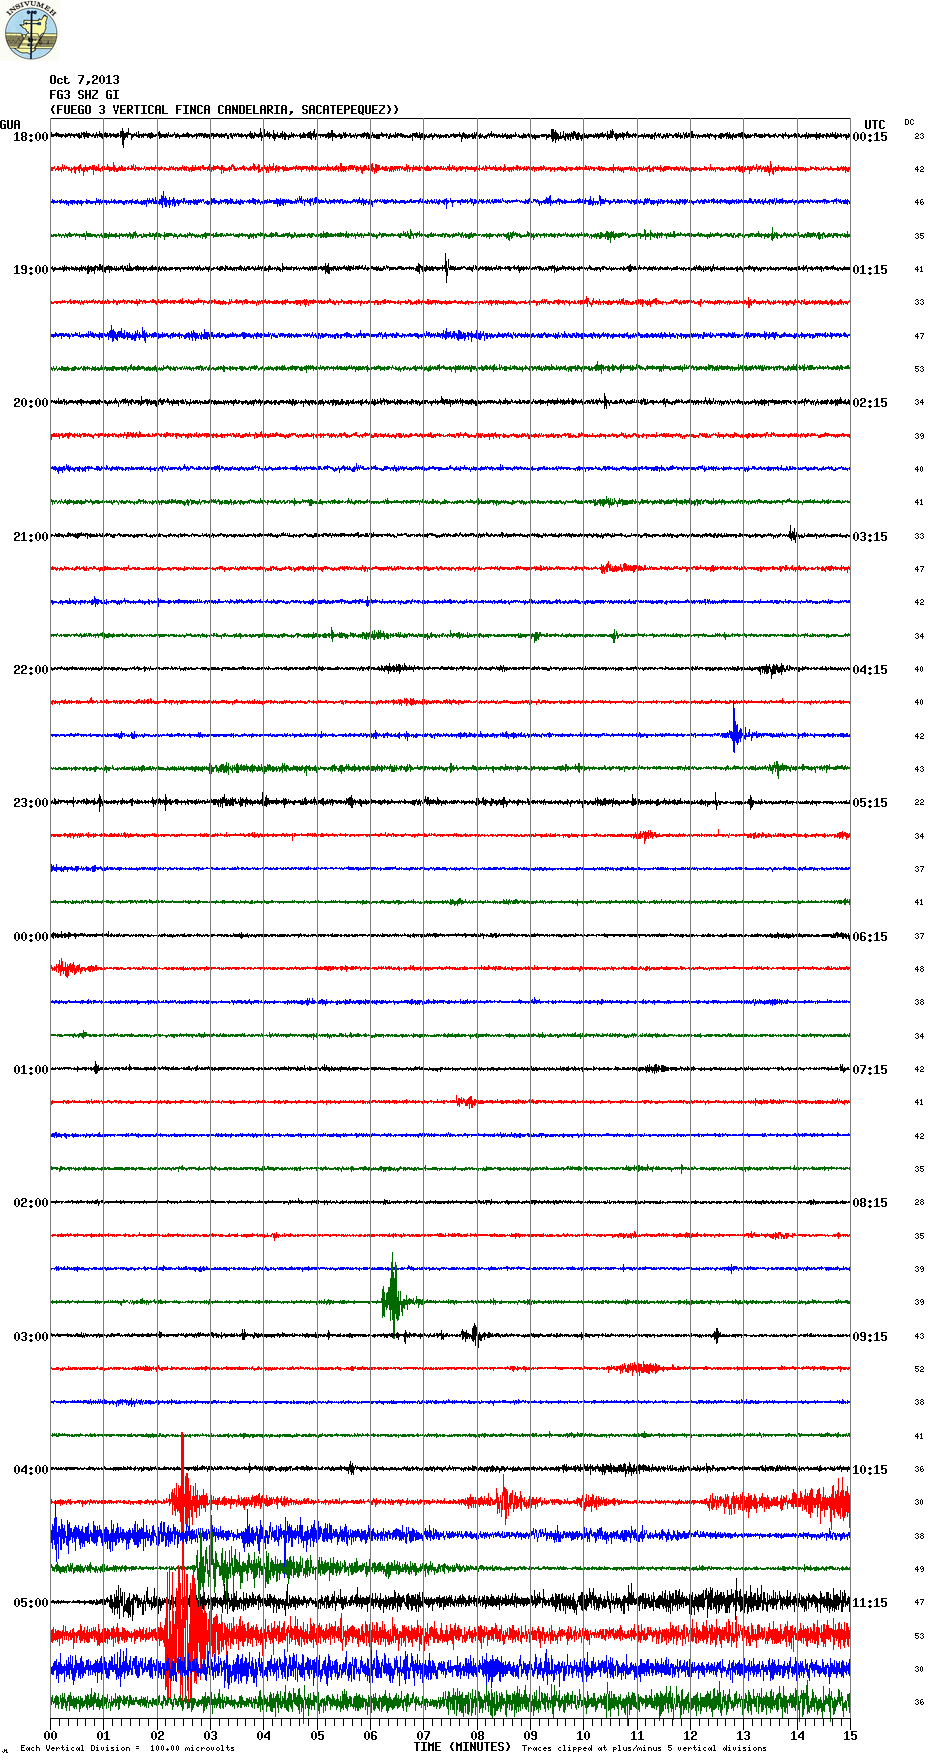 Seismic signal showing the increase of Fuego's activity this morning